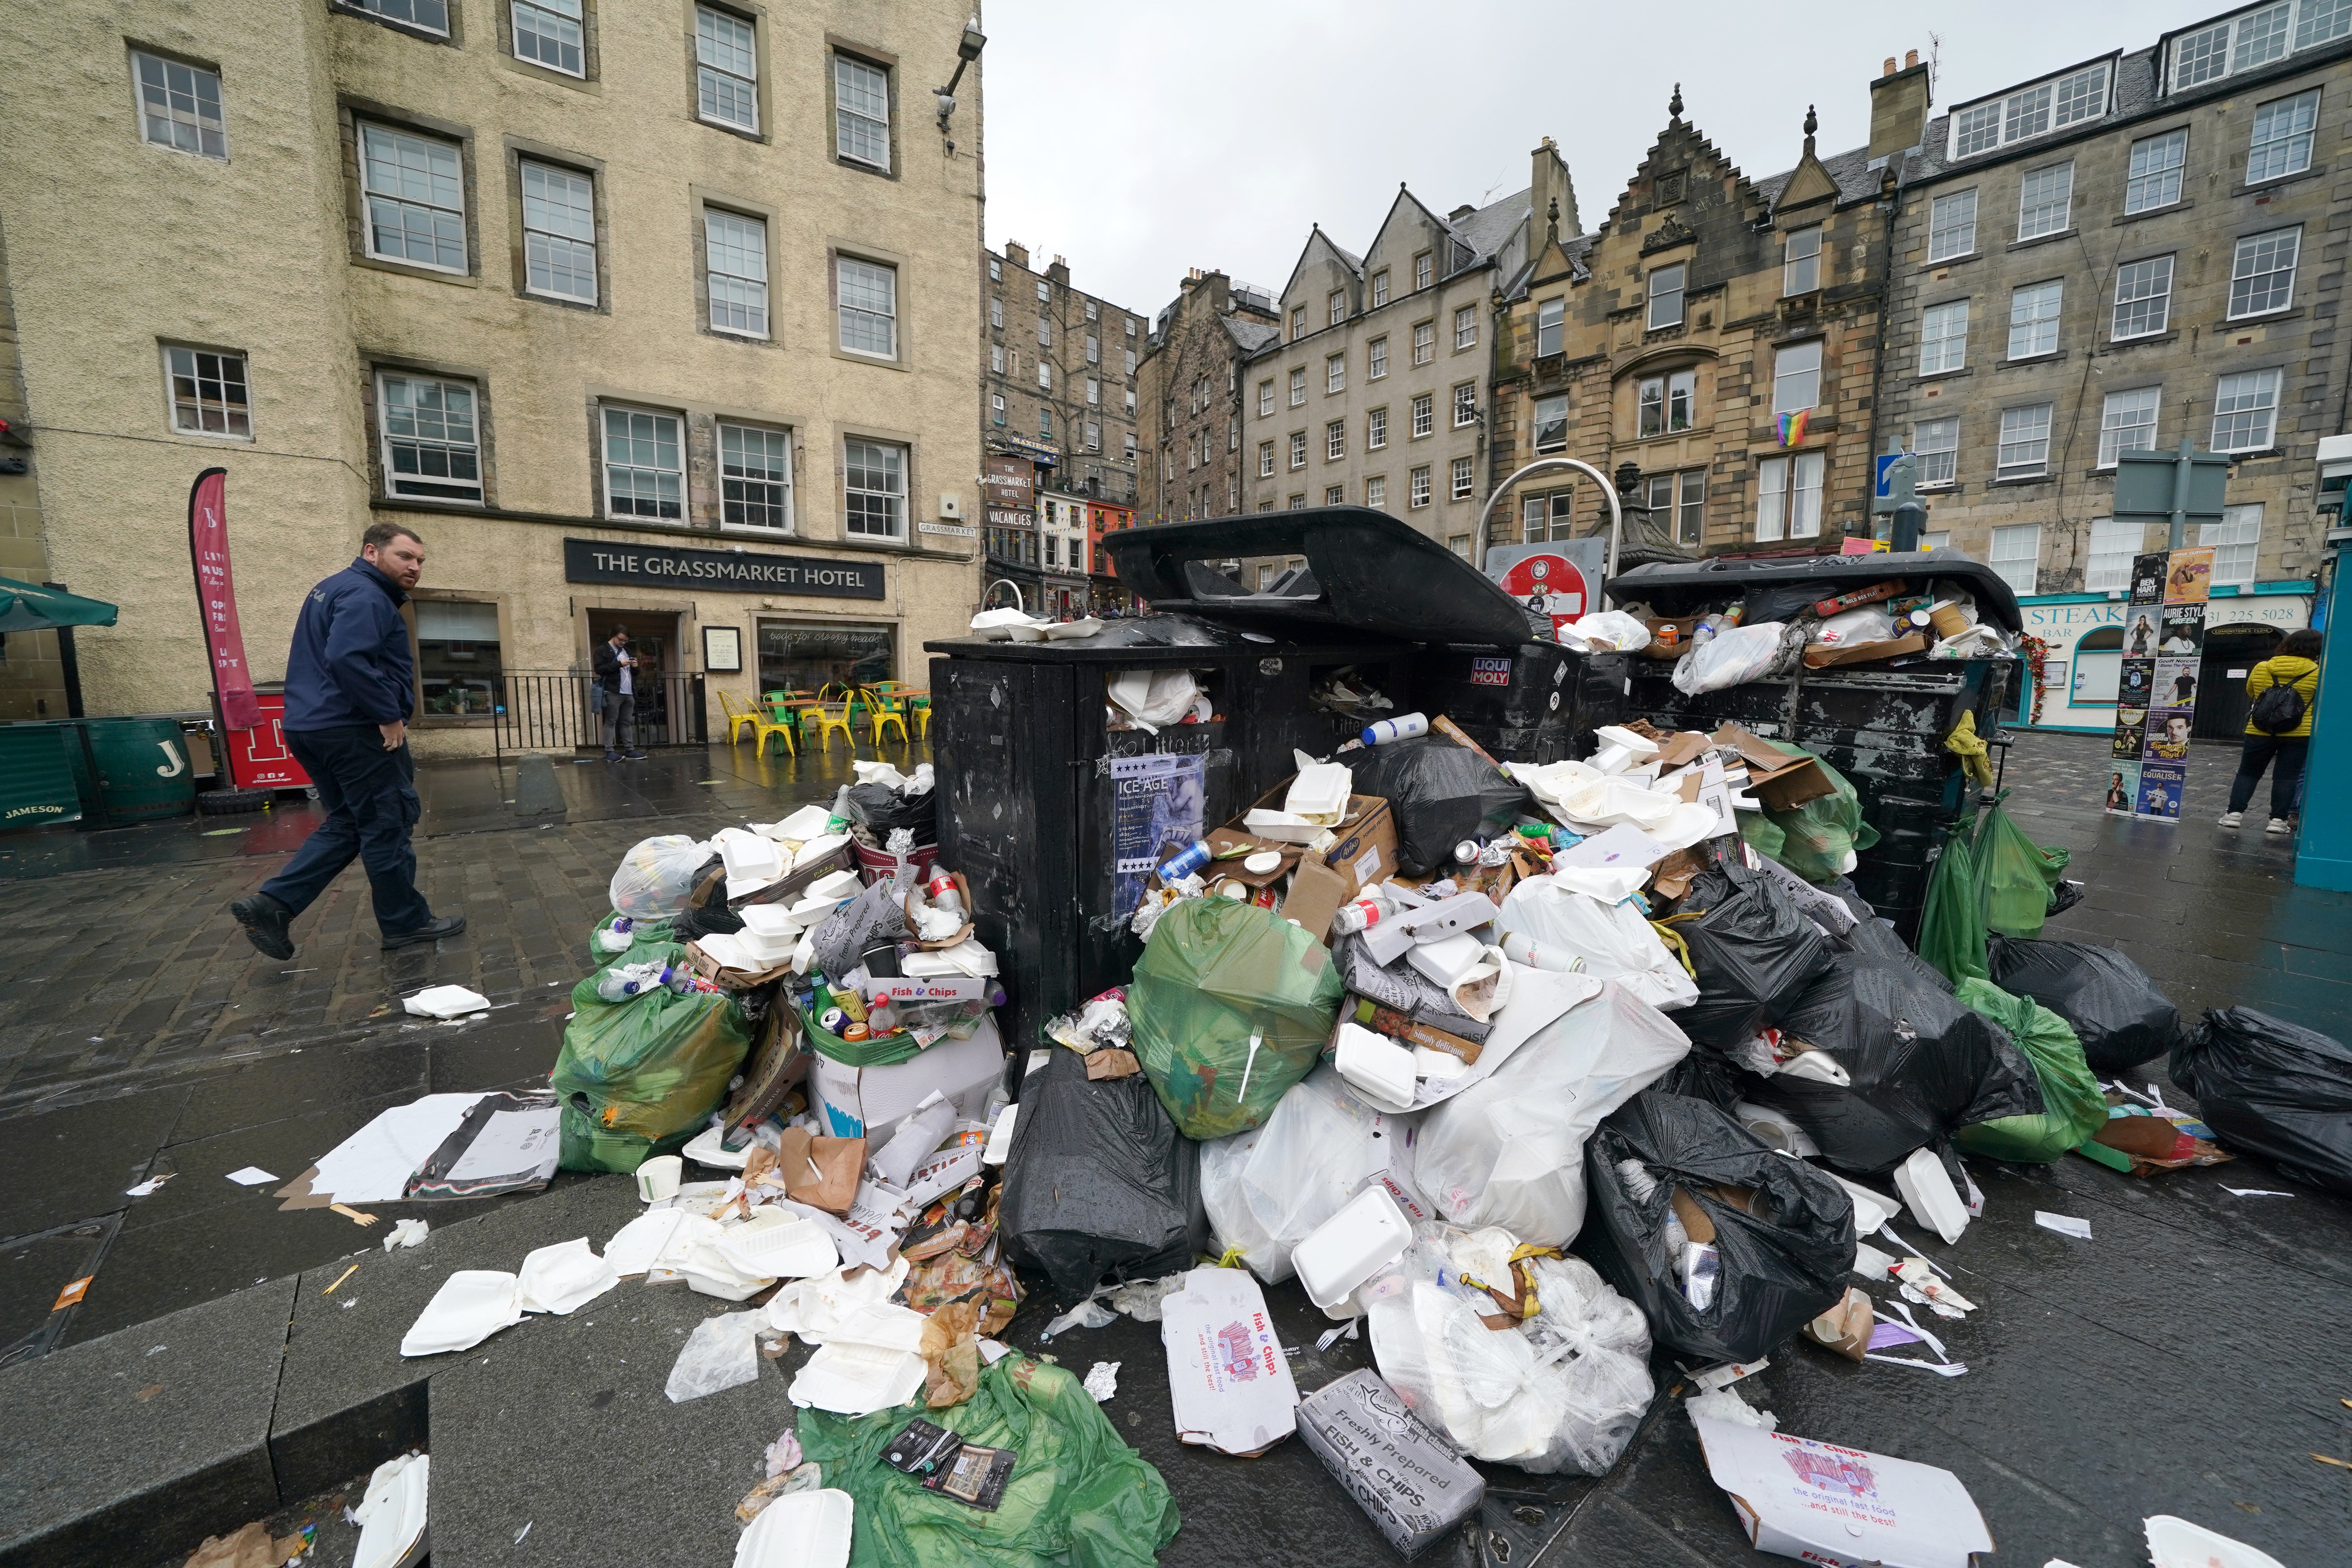 A strike by cleansing workers two years ago left the streets of Edinburgh strewn with rubbish during festival season (PA)